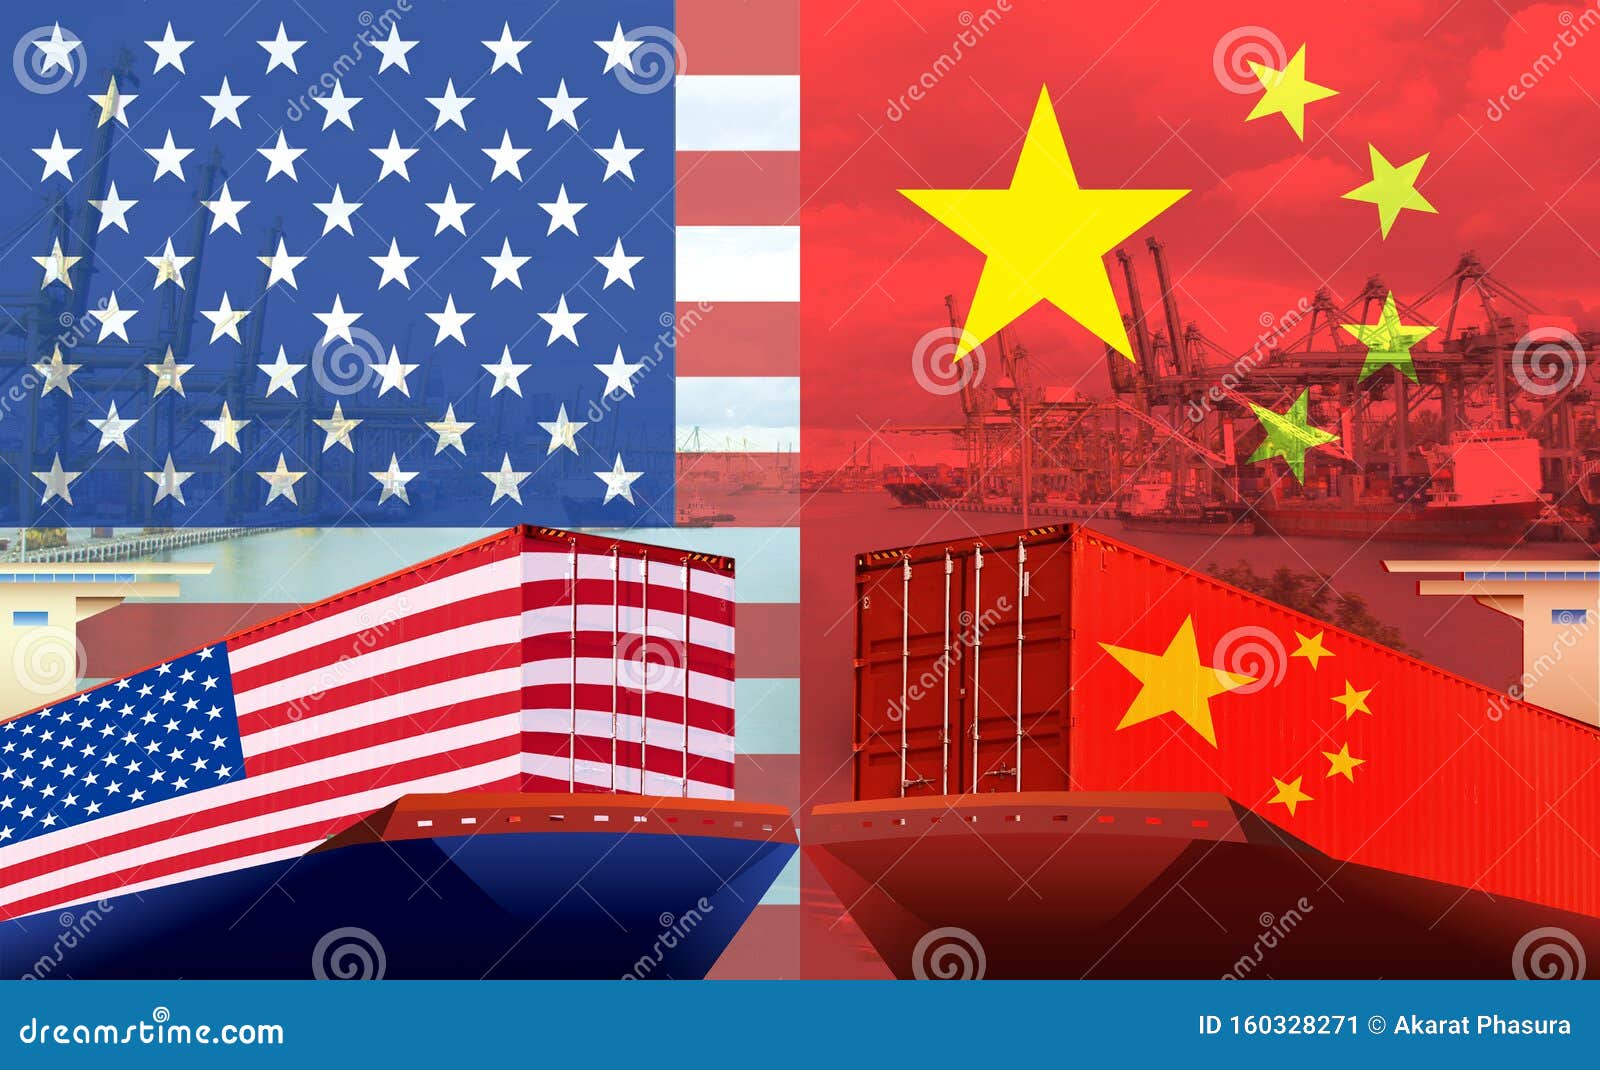 concept image of usa-china trade war, economy conflict, us tariffs on exports to china,